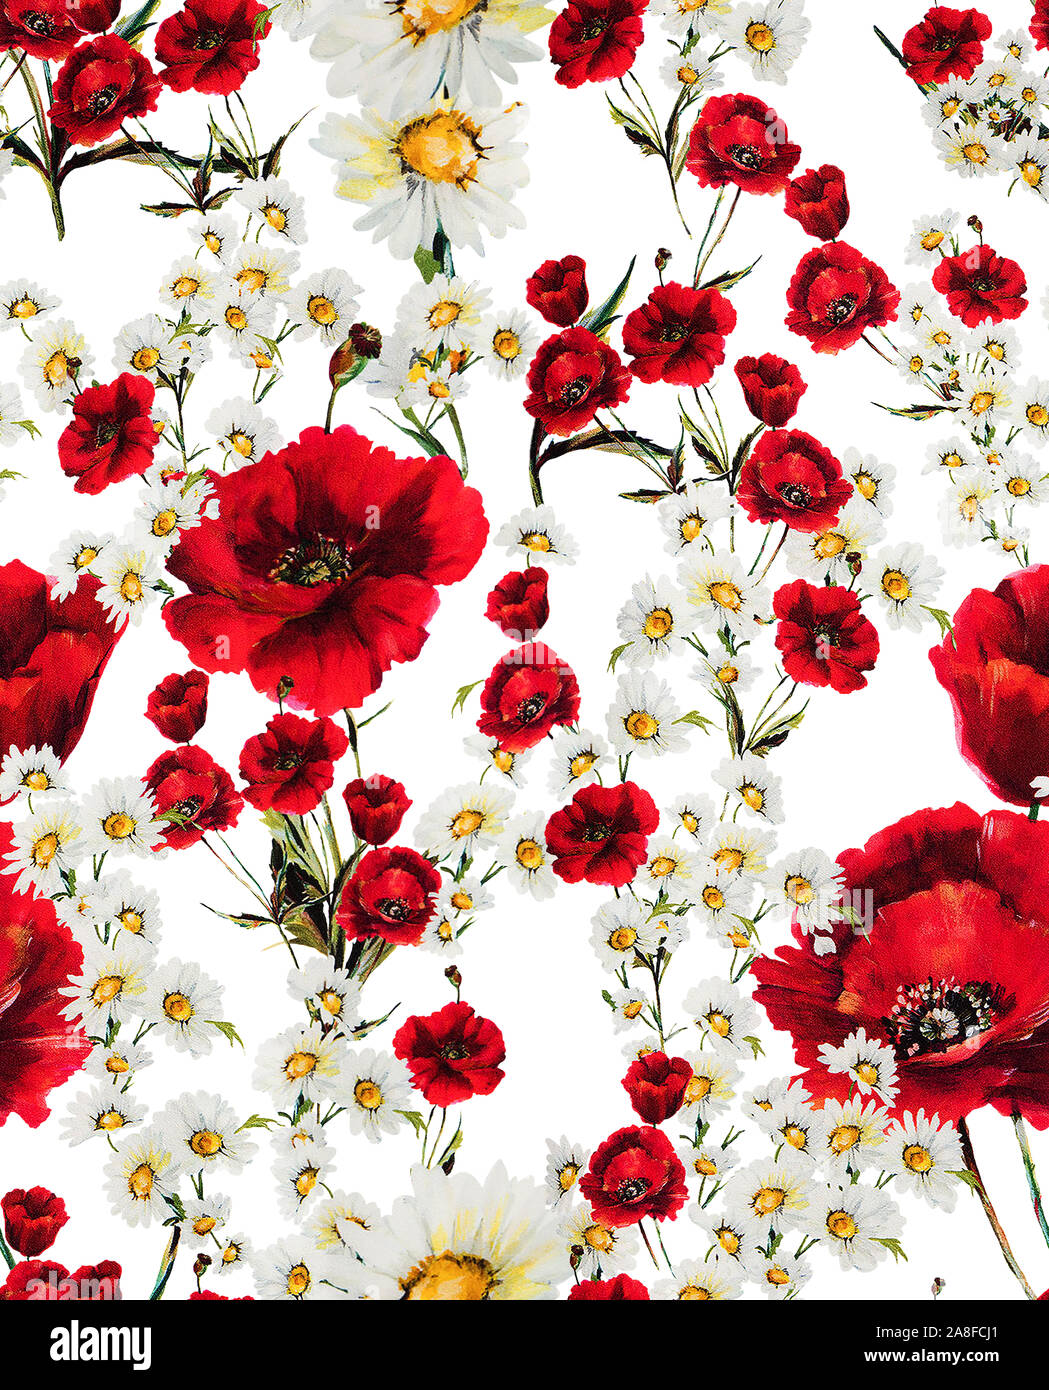 Seamless Floral Pattern With Of Red Flowers And White Daisy On